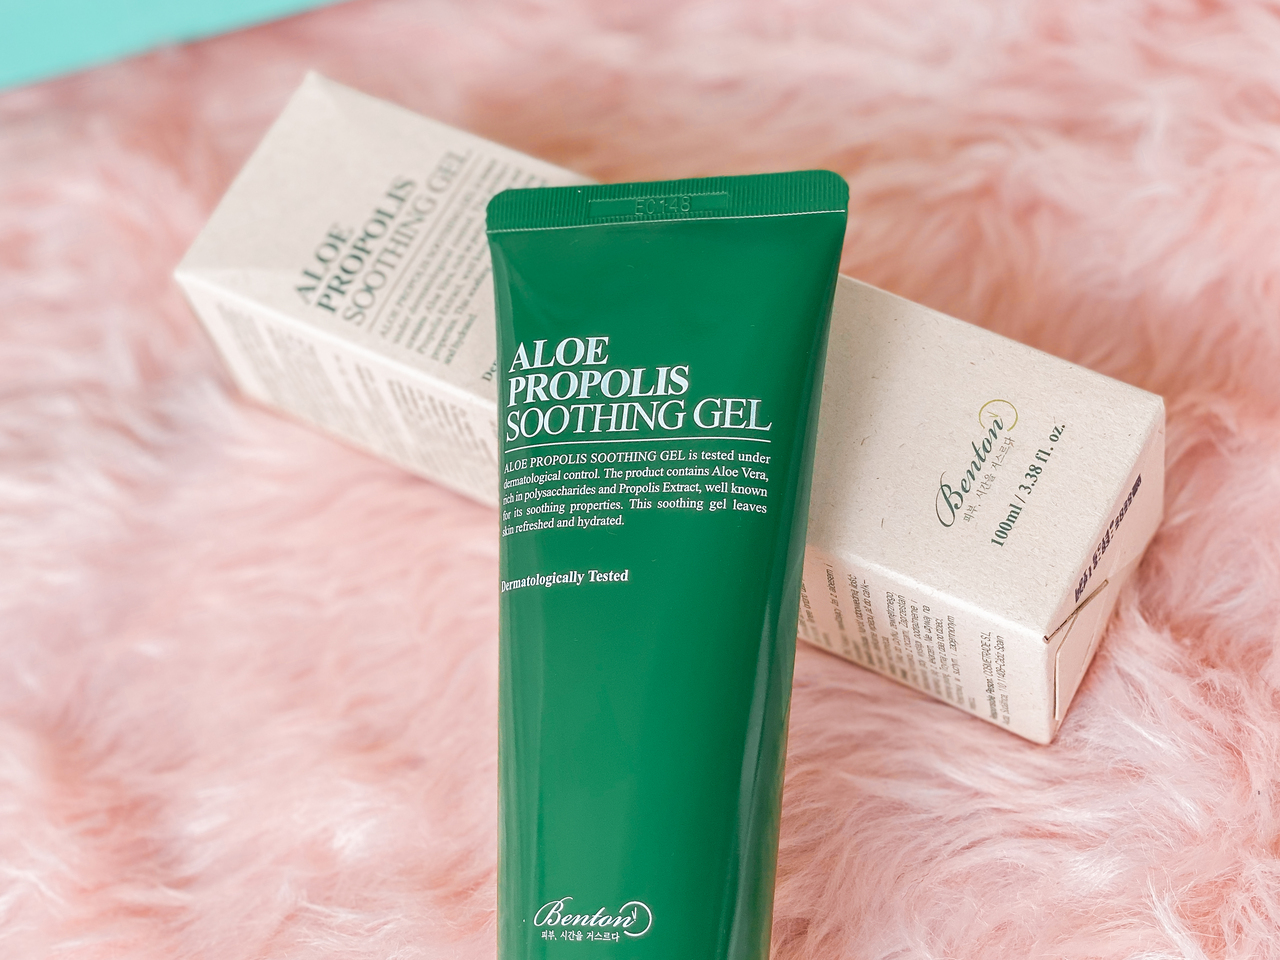 Style Korean Try Me Review Me: First Impressions on Influencers' Favorites from BENTON - BENTON ALOE PROPOLIS SOOTHING GEL